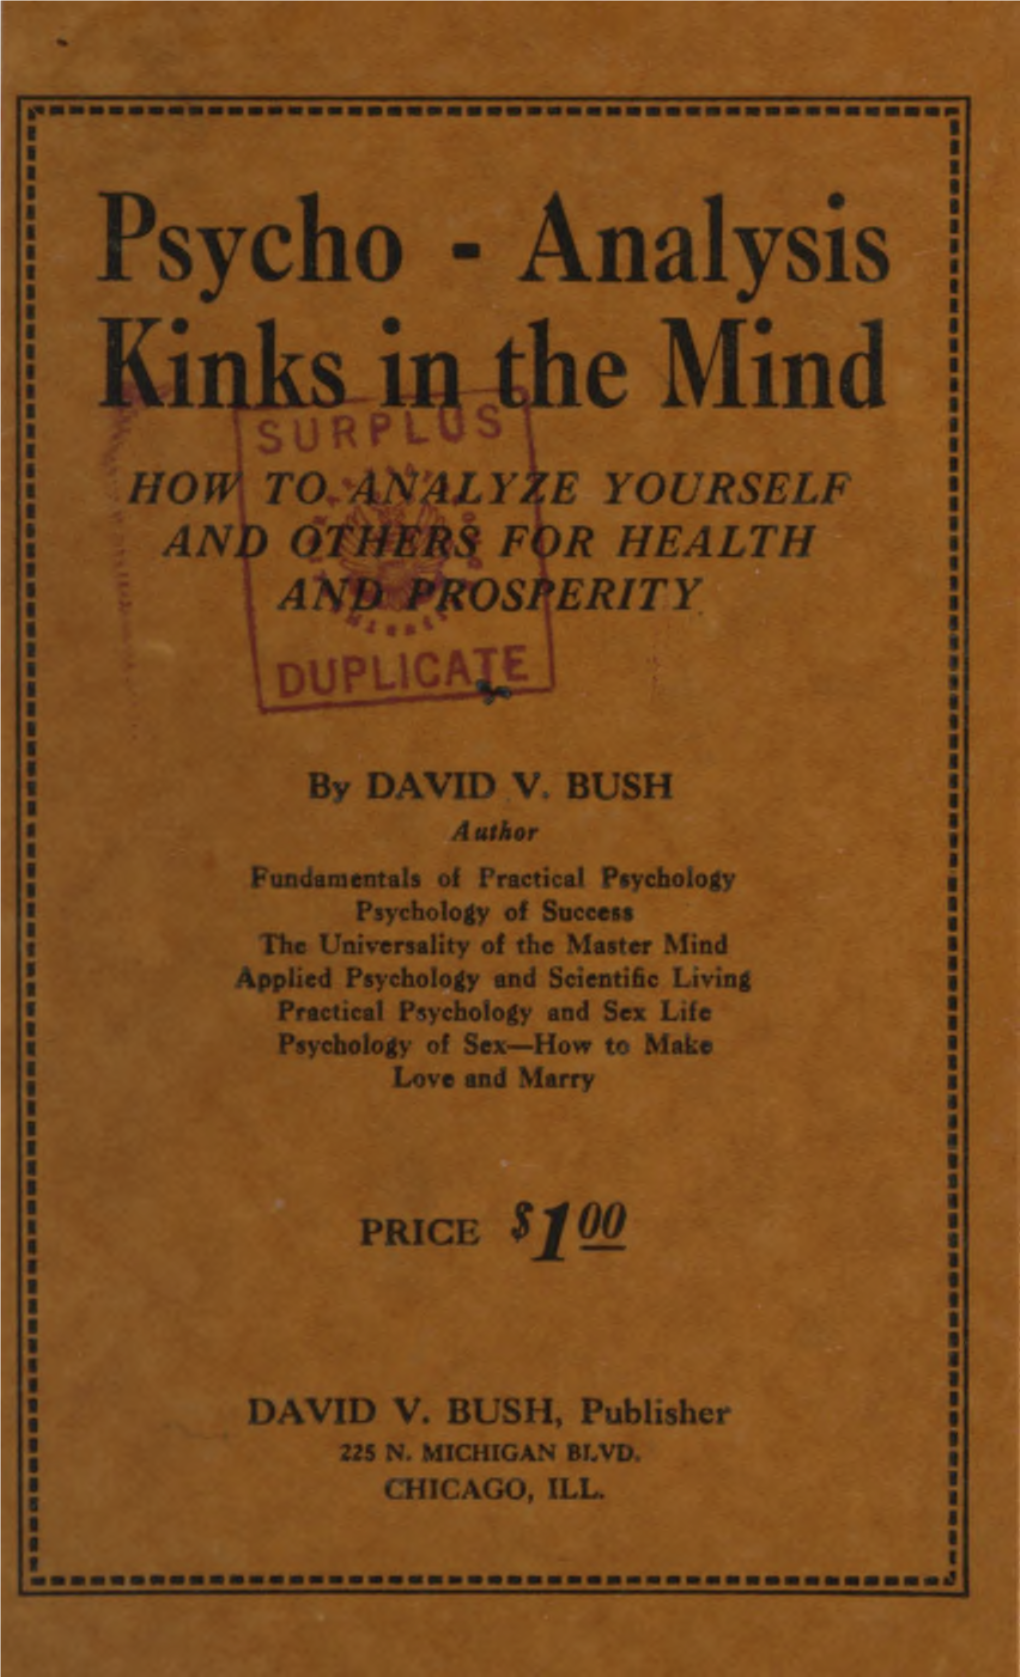 Psycho-Analysis, Kinks in the Mind